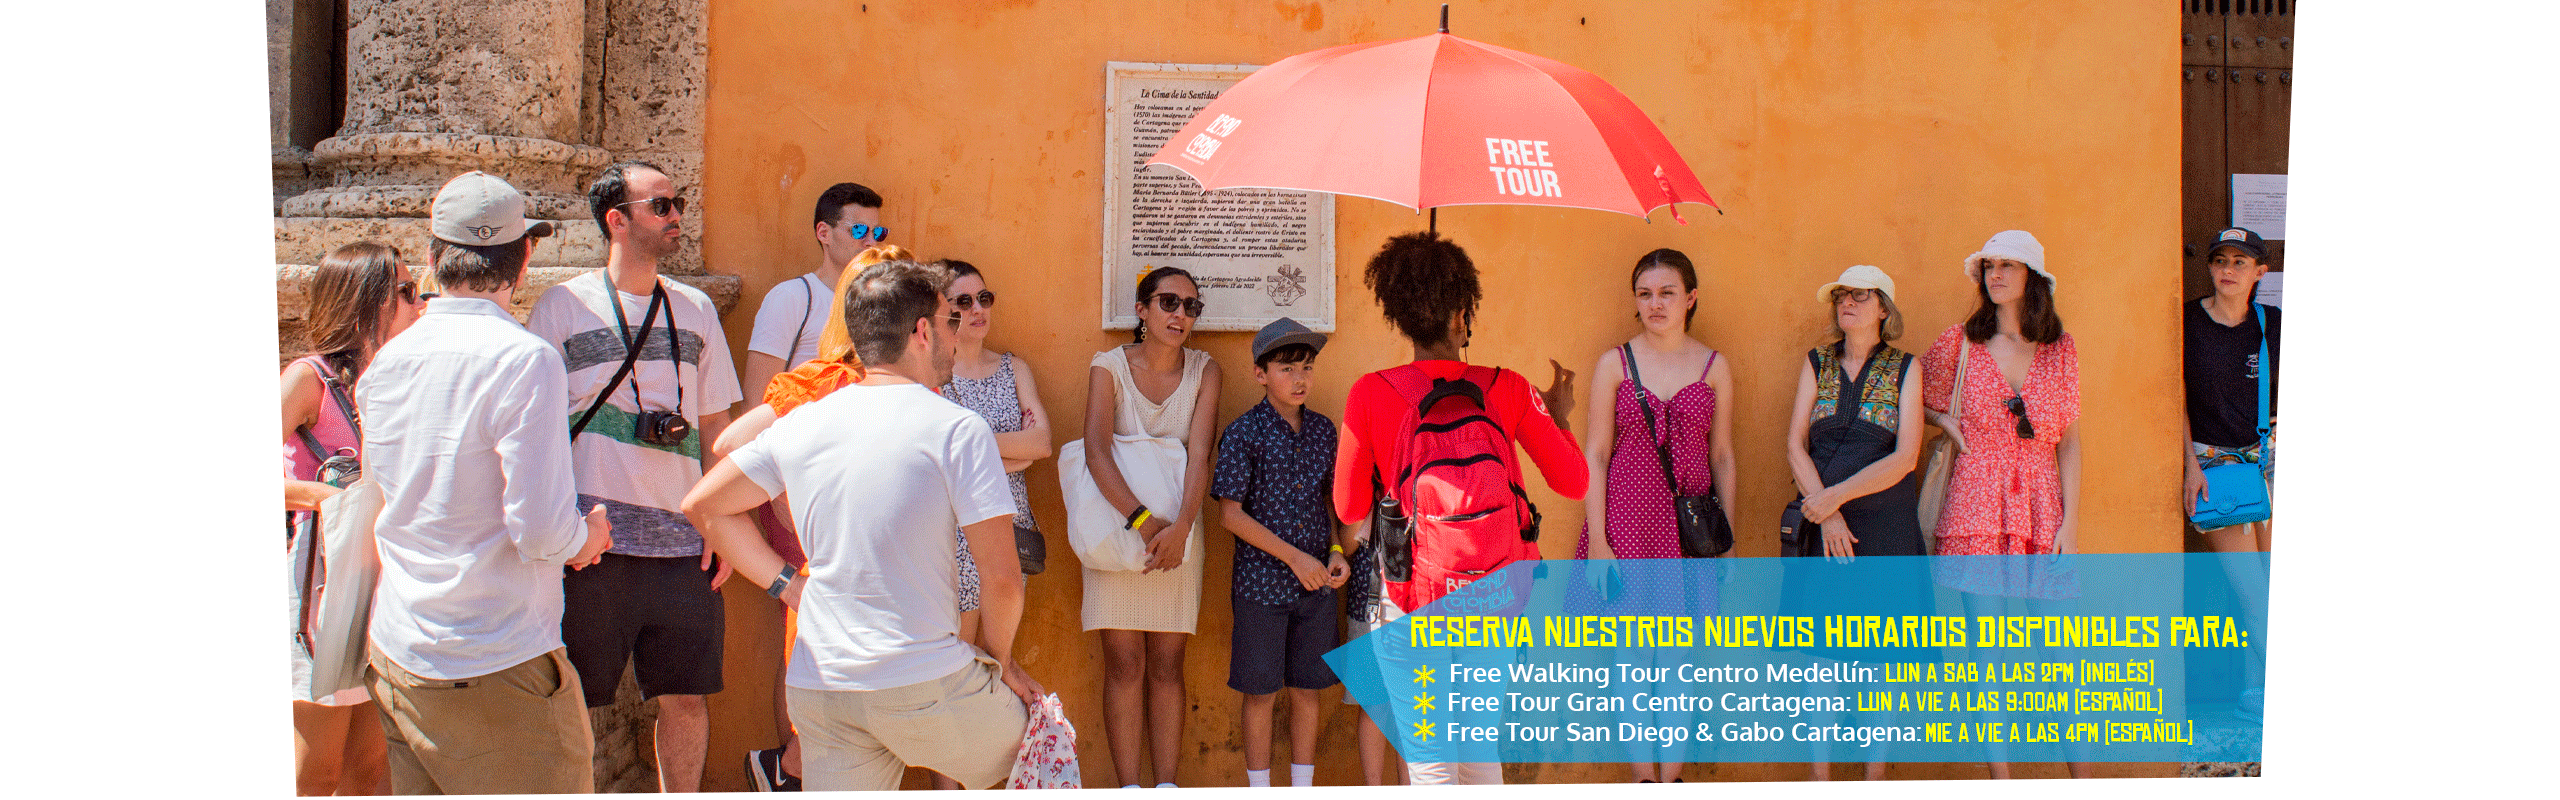 Beyond Colombia Free Tours | Cartagena